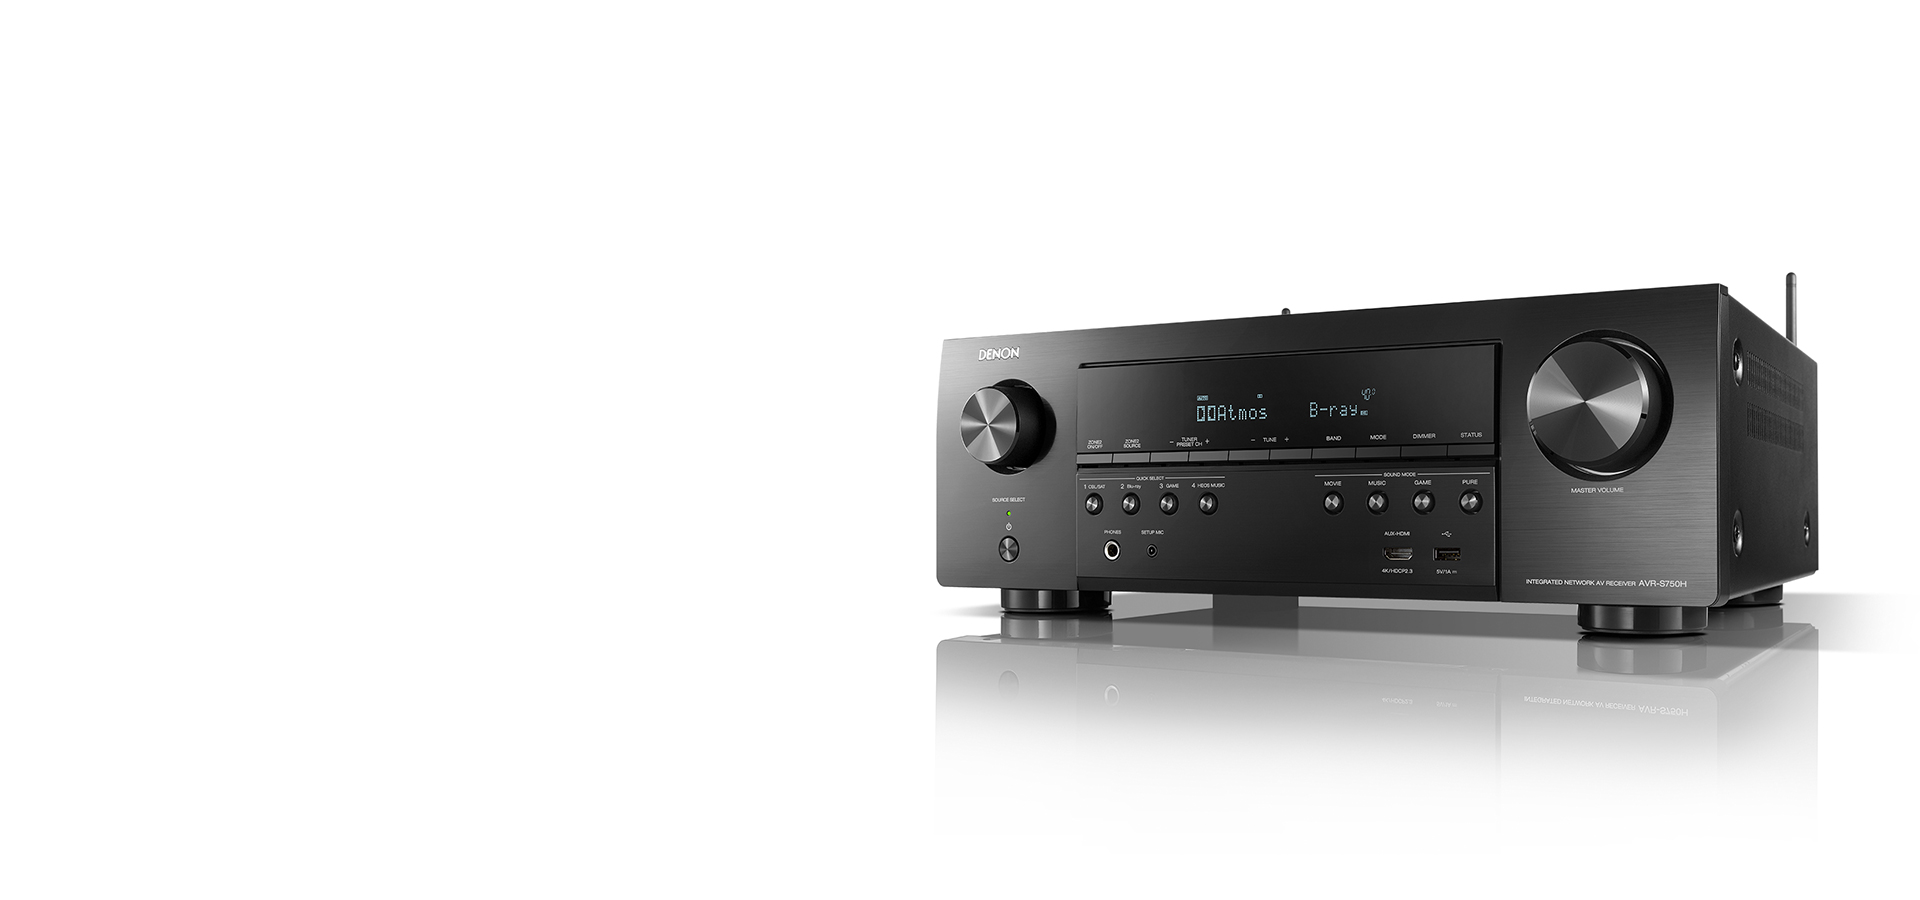 Denon AVR-S750H Receiver, 7.2 Channel (165W x 7) - 4K Ultra HD Home Theater  (2019) | Music Streaming | New - eARC, 3D Dolby Surround Sound (Atmos